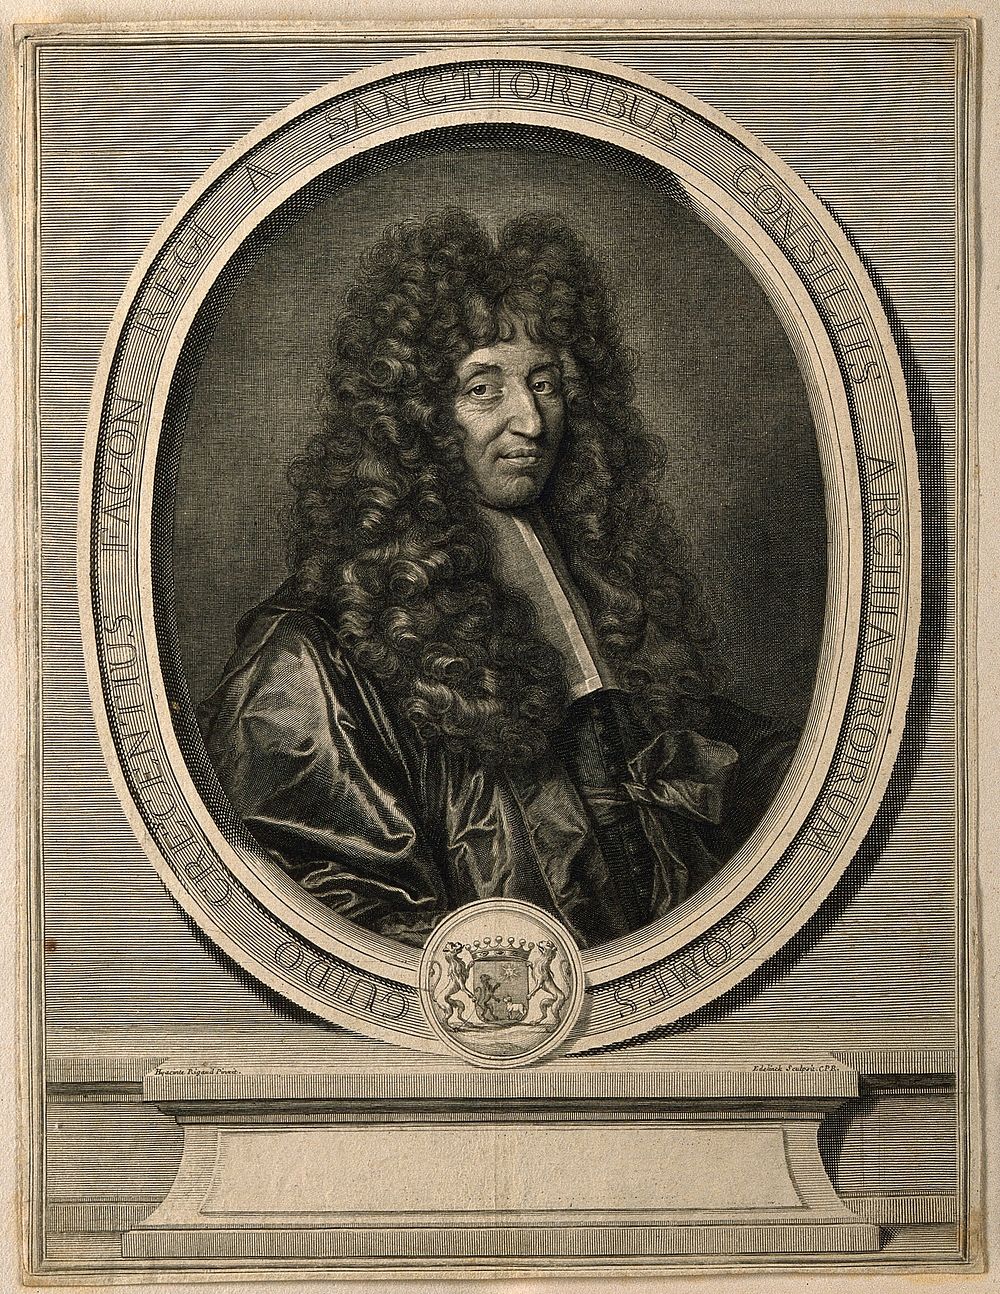 Gui Crescent Fagon. Line engraving by G. Edelinck, 1695, after H. Rigaud, 1694.